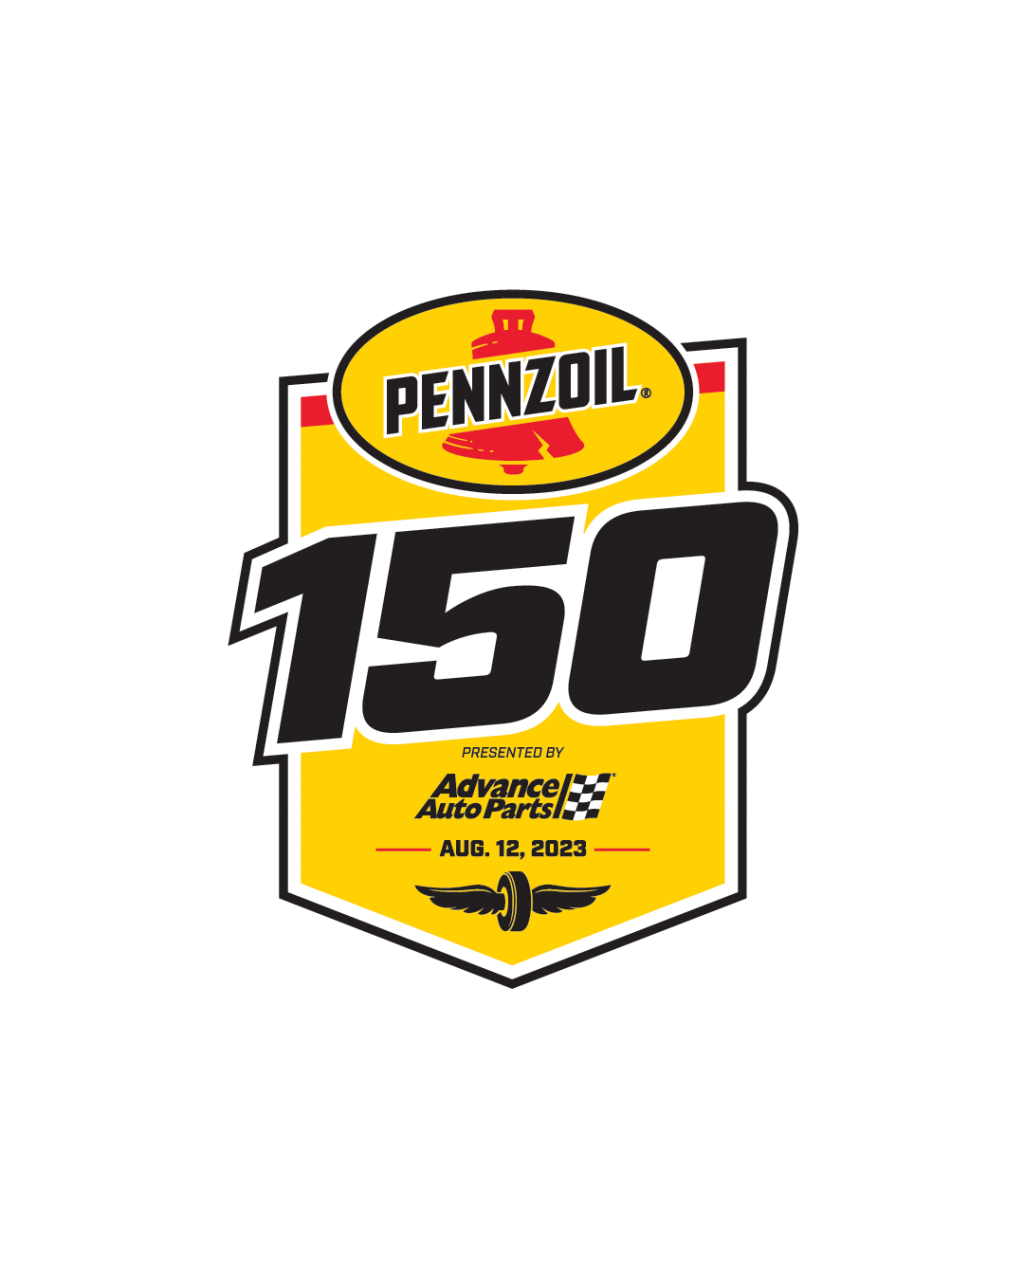 Pennzoil 150 Presented by Advance Auto Parts Preview